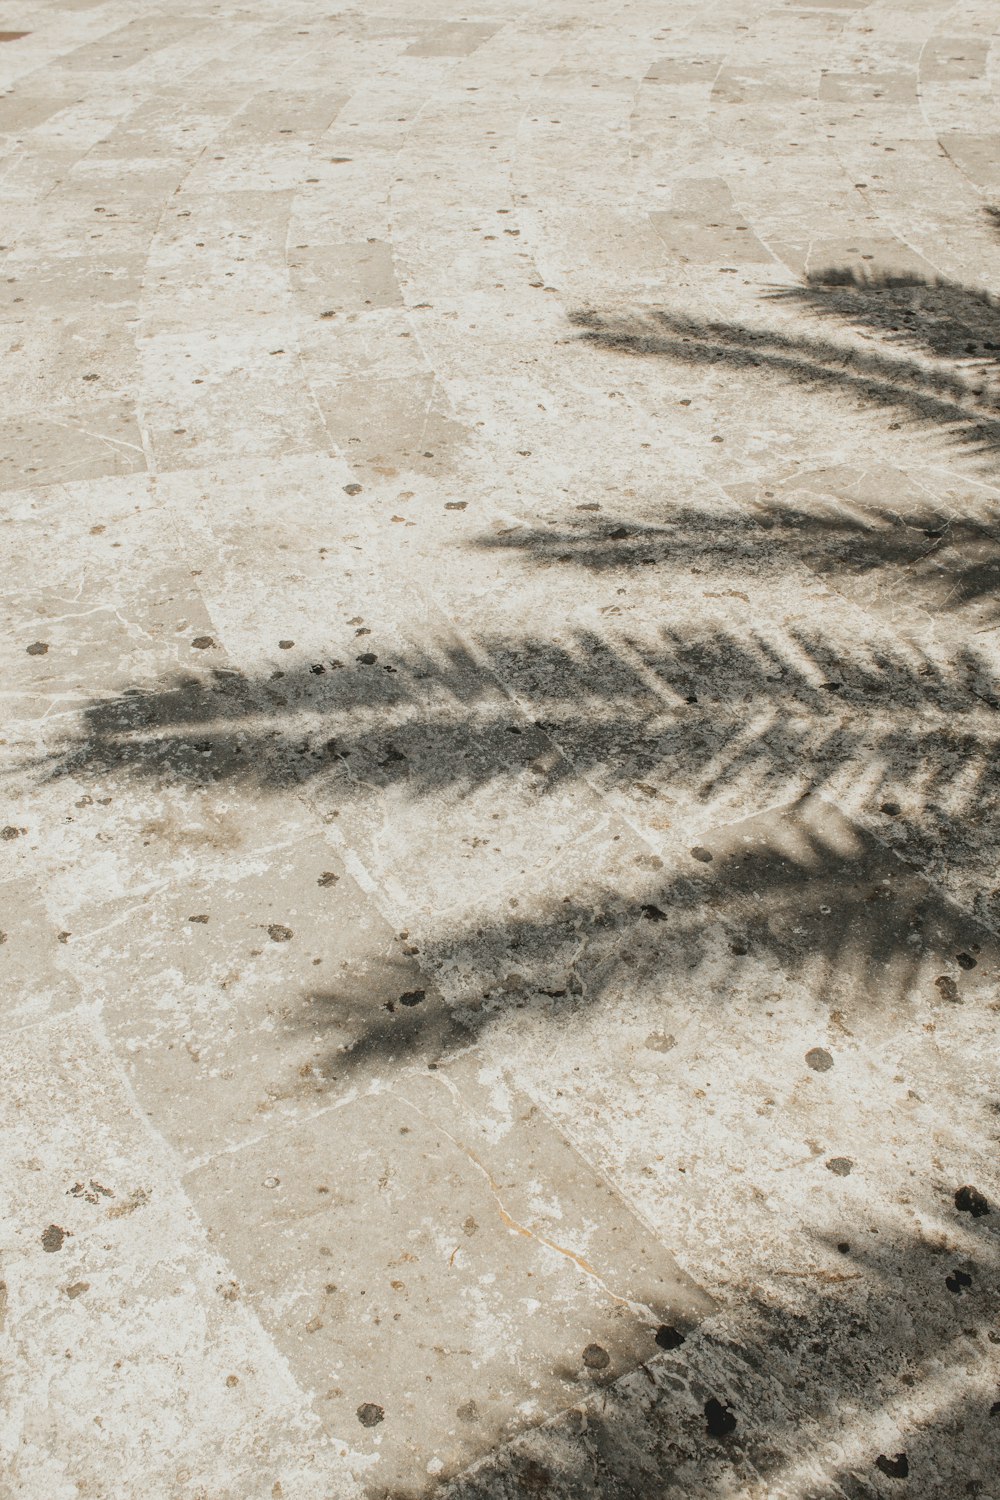 a palm tree casts a shadow on the ground